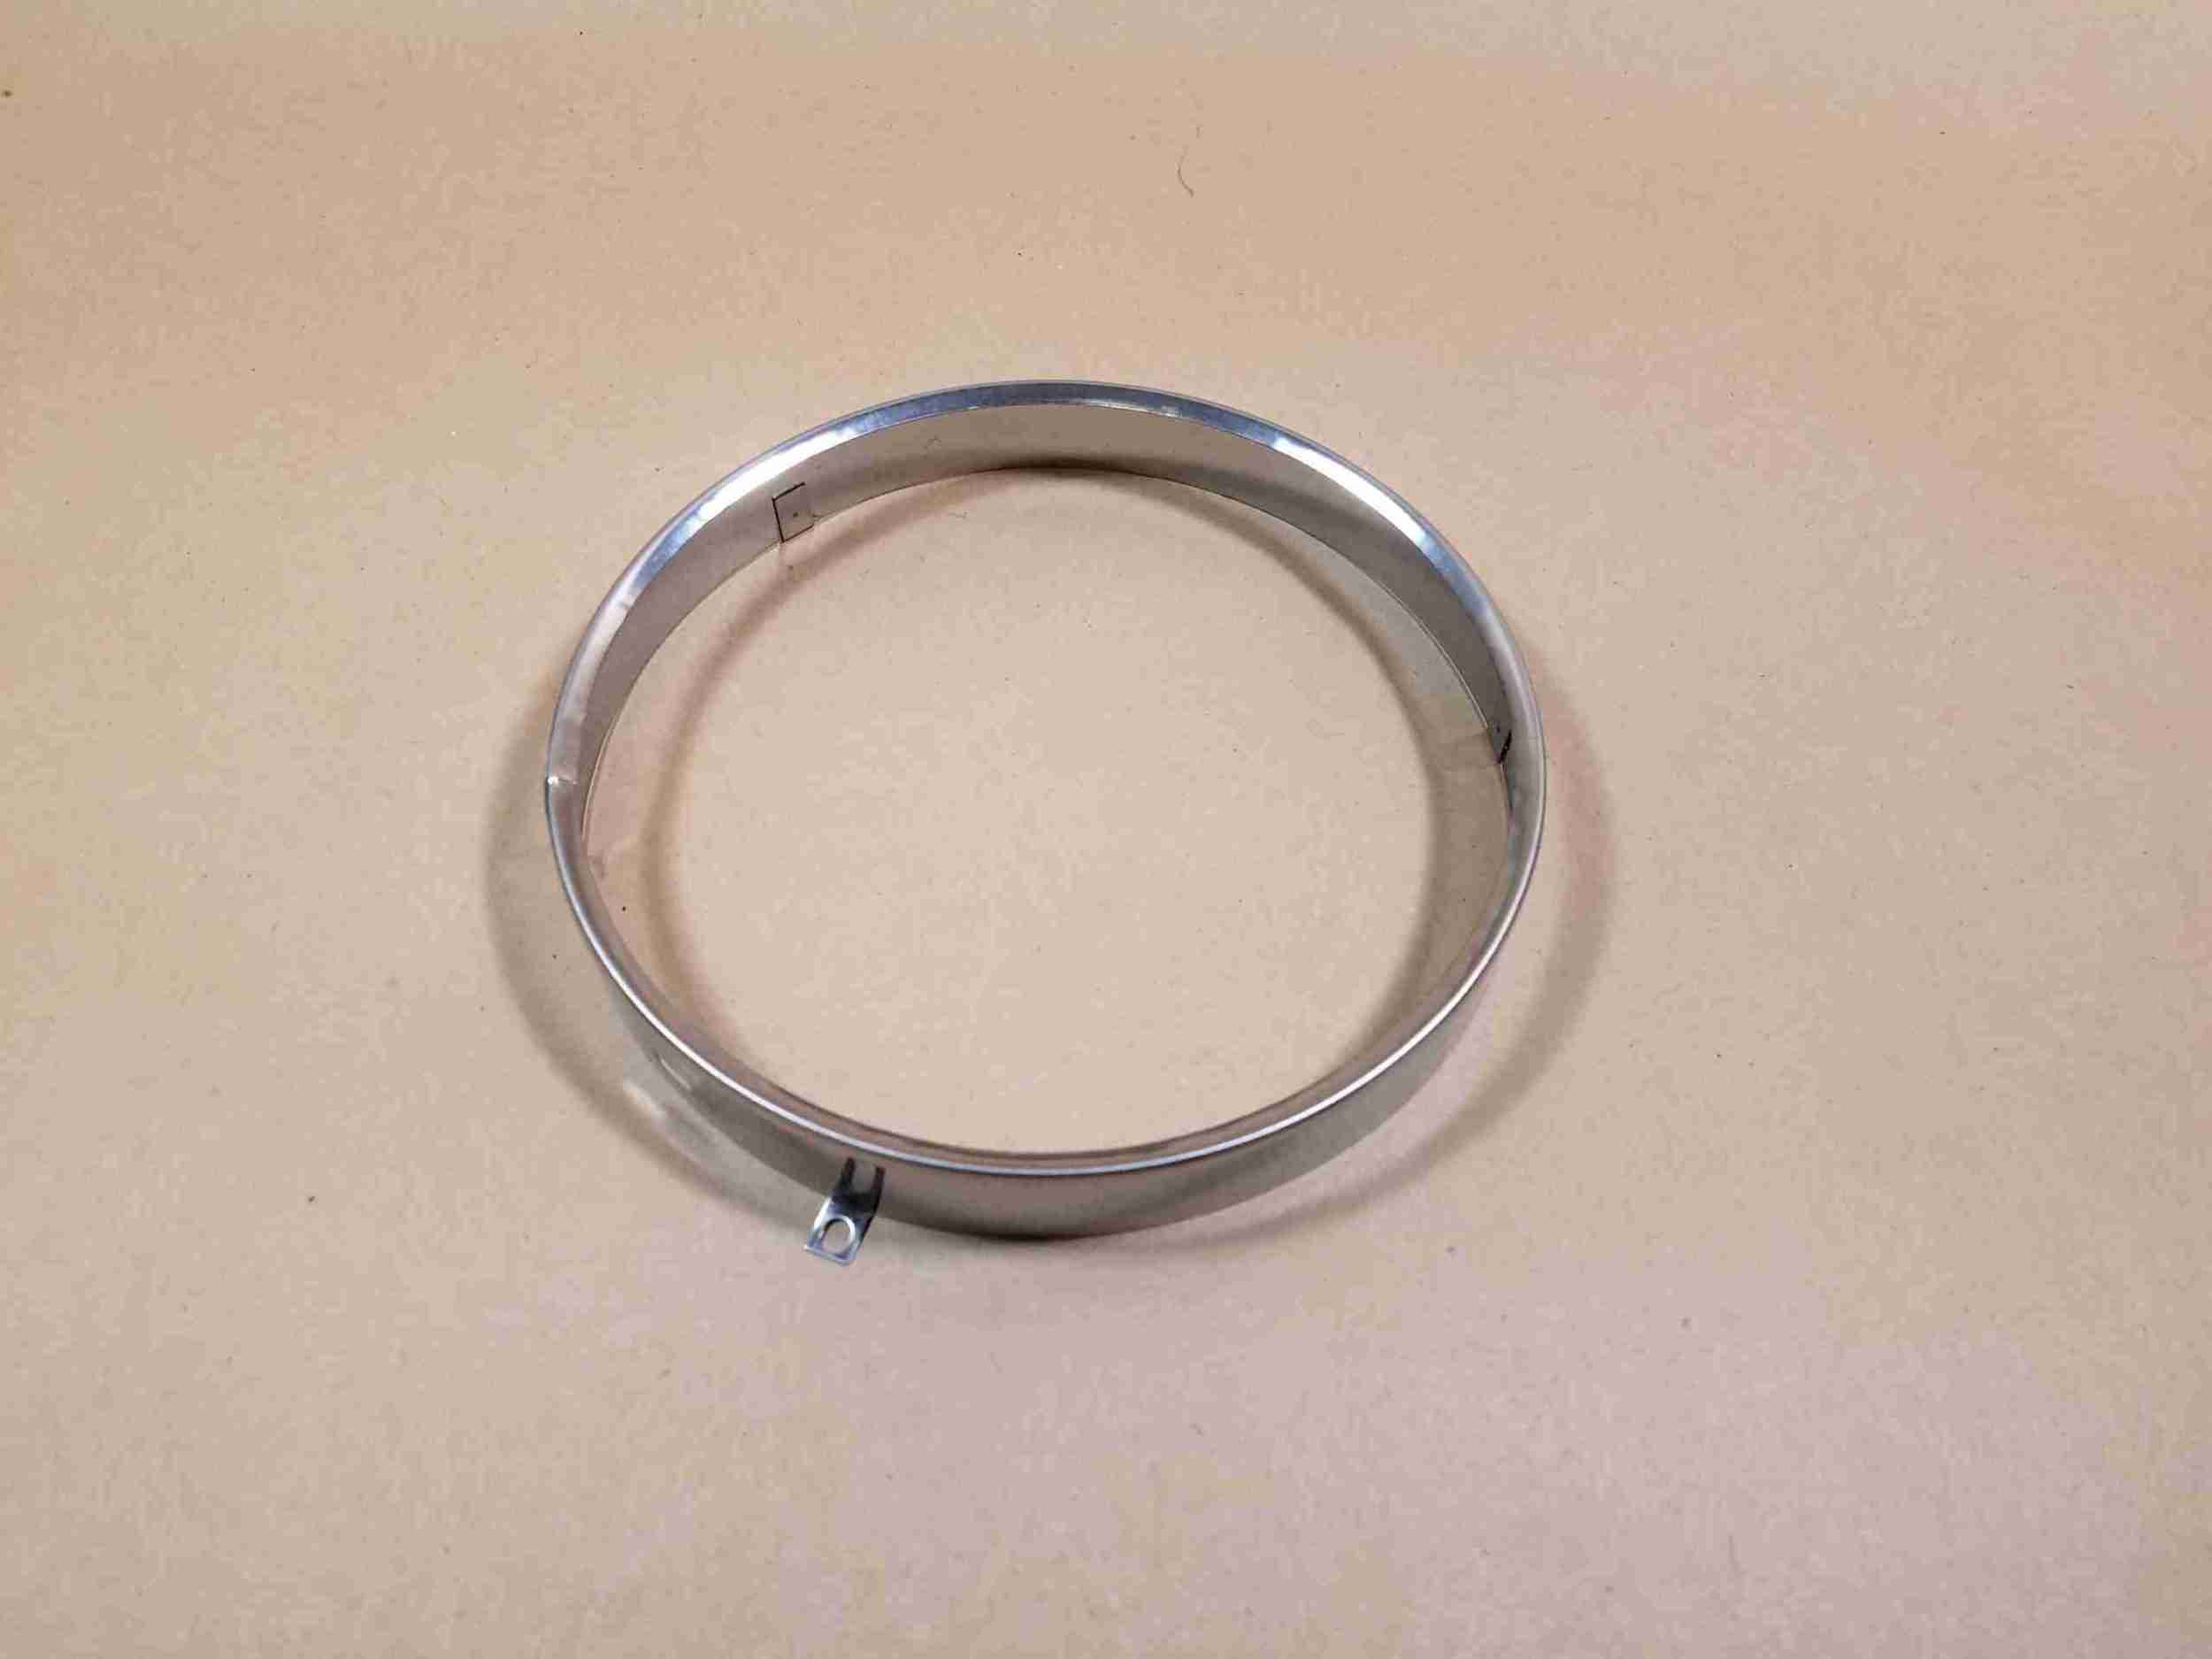 1940-74 Headlamp Retaining Ring, type 1 w/ 3 tabs, 1940-55, 1970-73 All F, 1971-72 All G, 1971-74 X